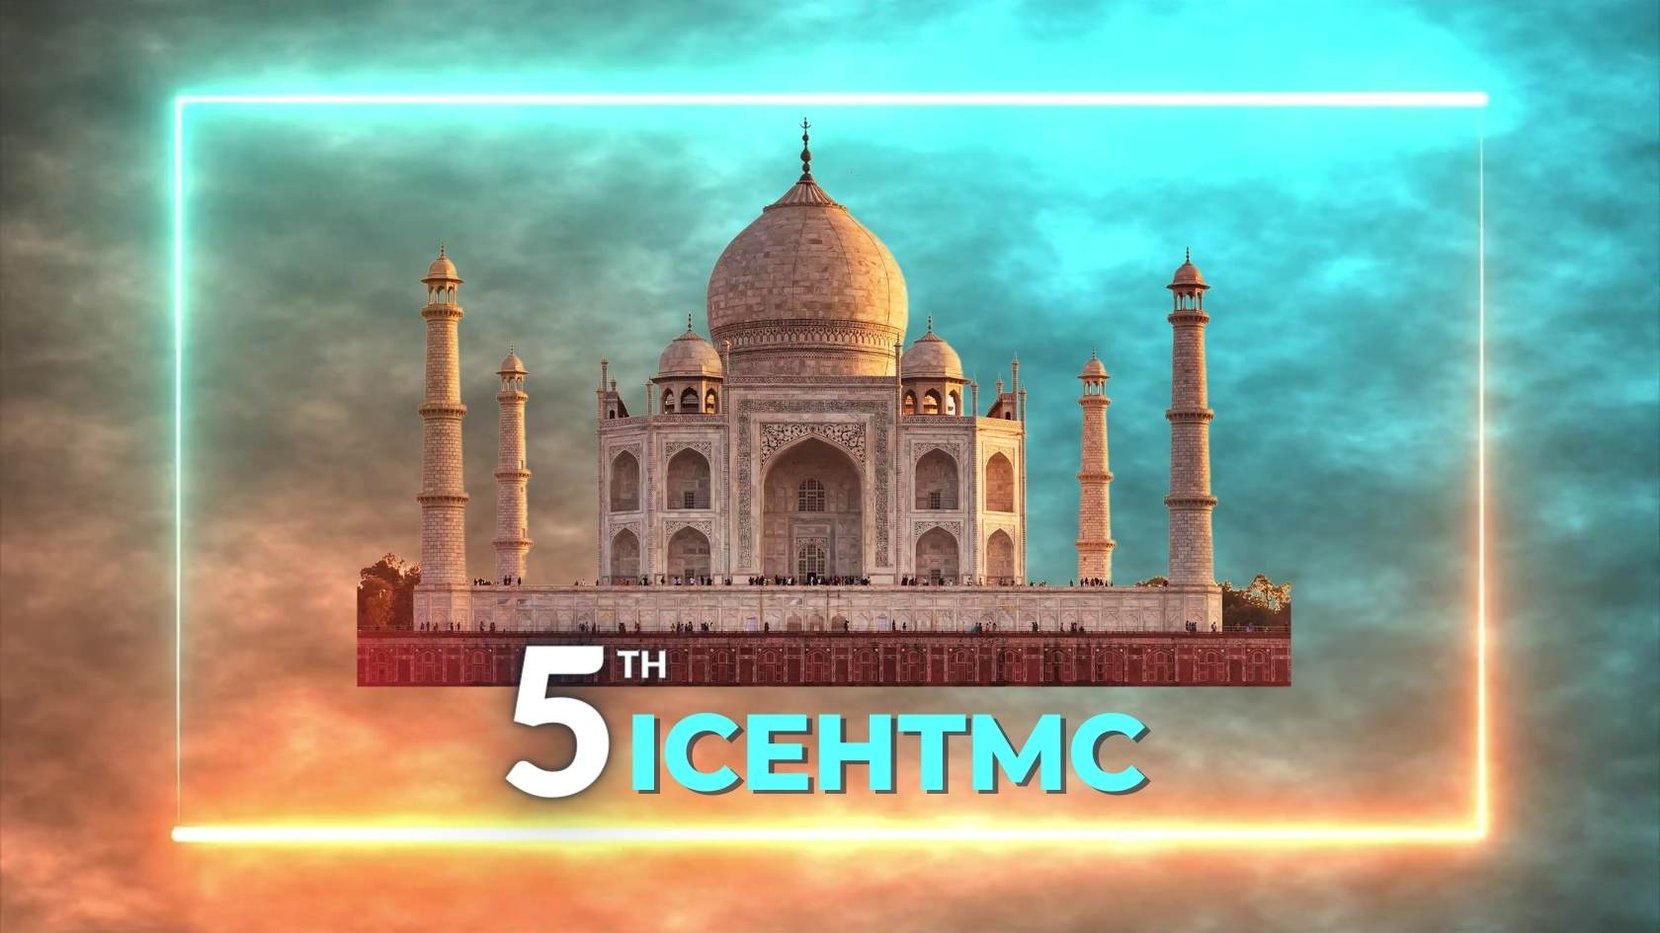 5th ICEHTMC: Learn more